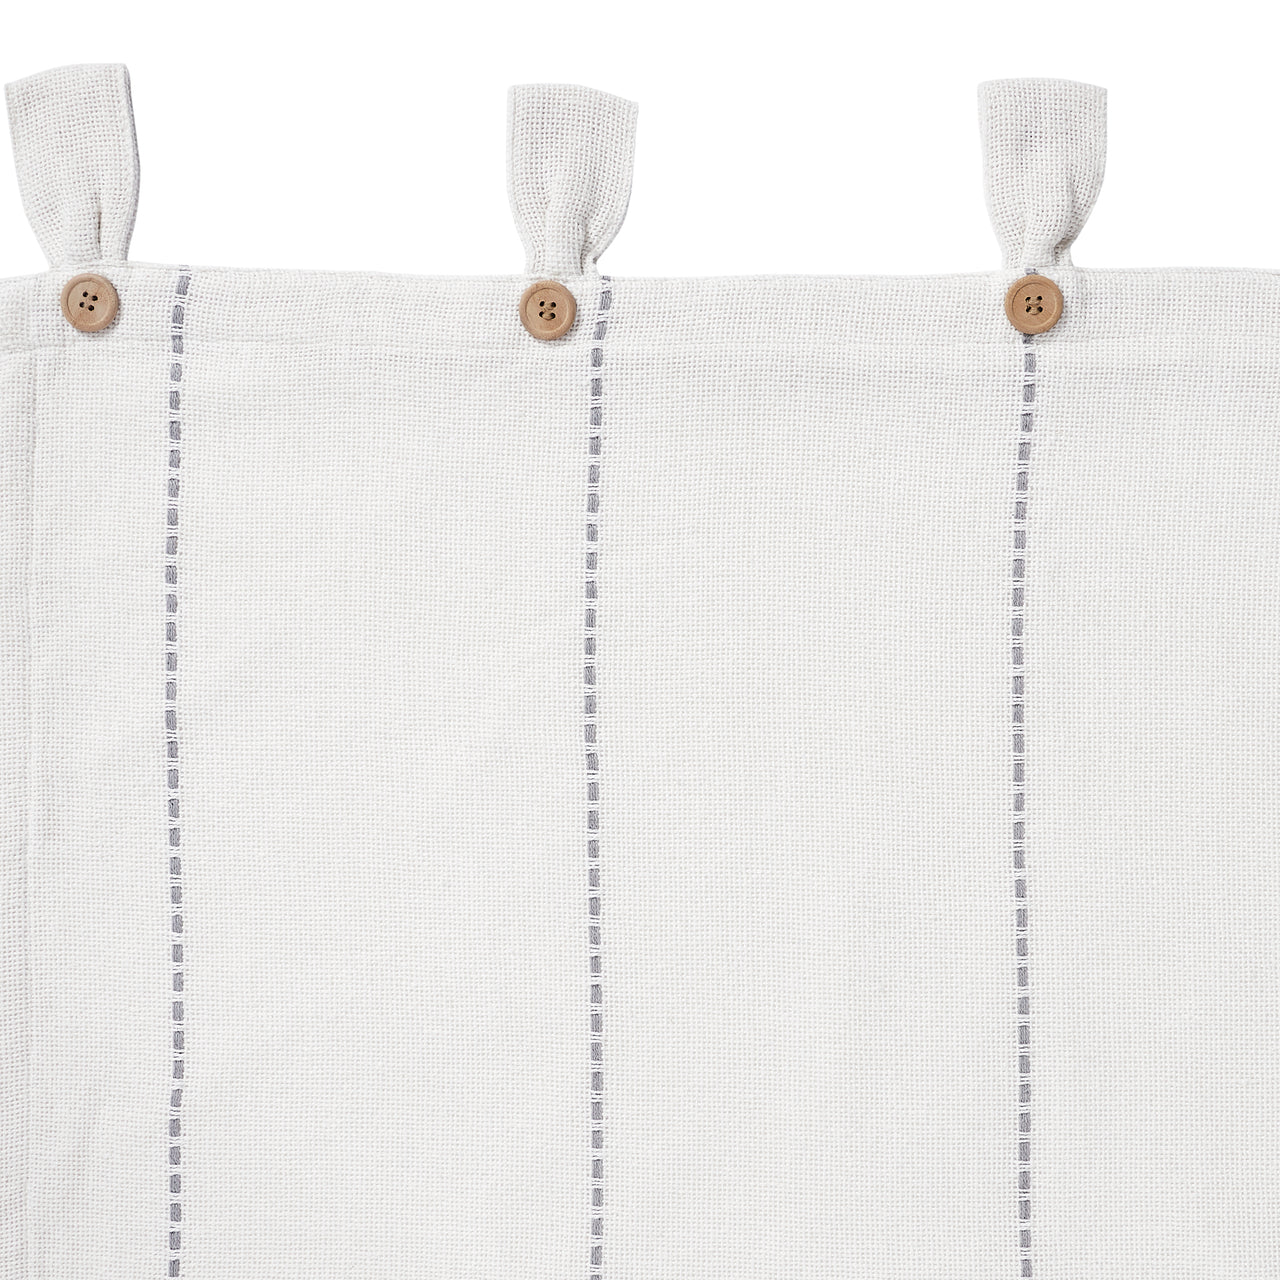 Stitched Burlap White Tier Curtain Set of 2 L24xW36